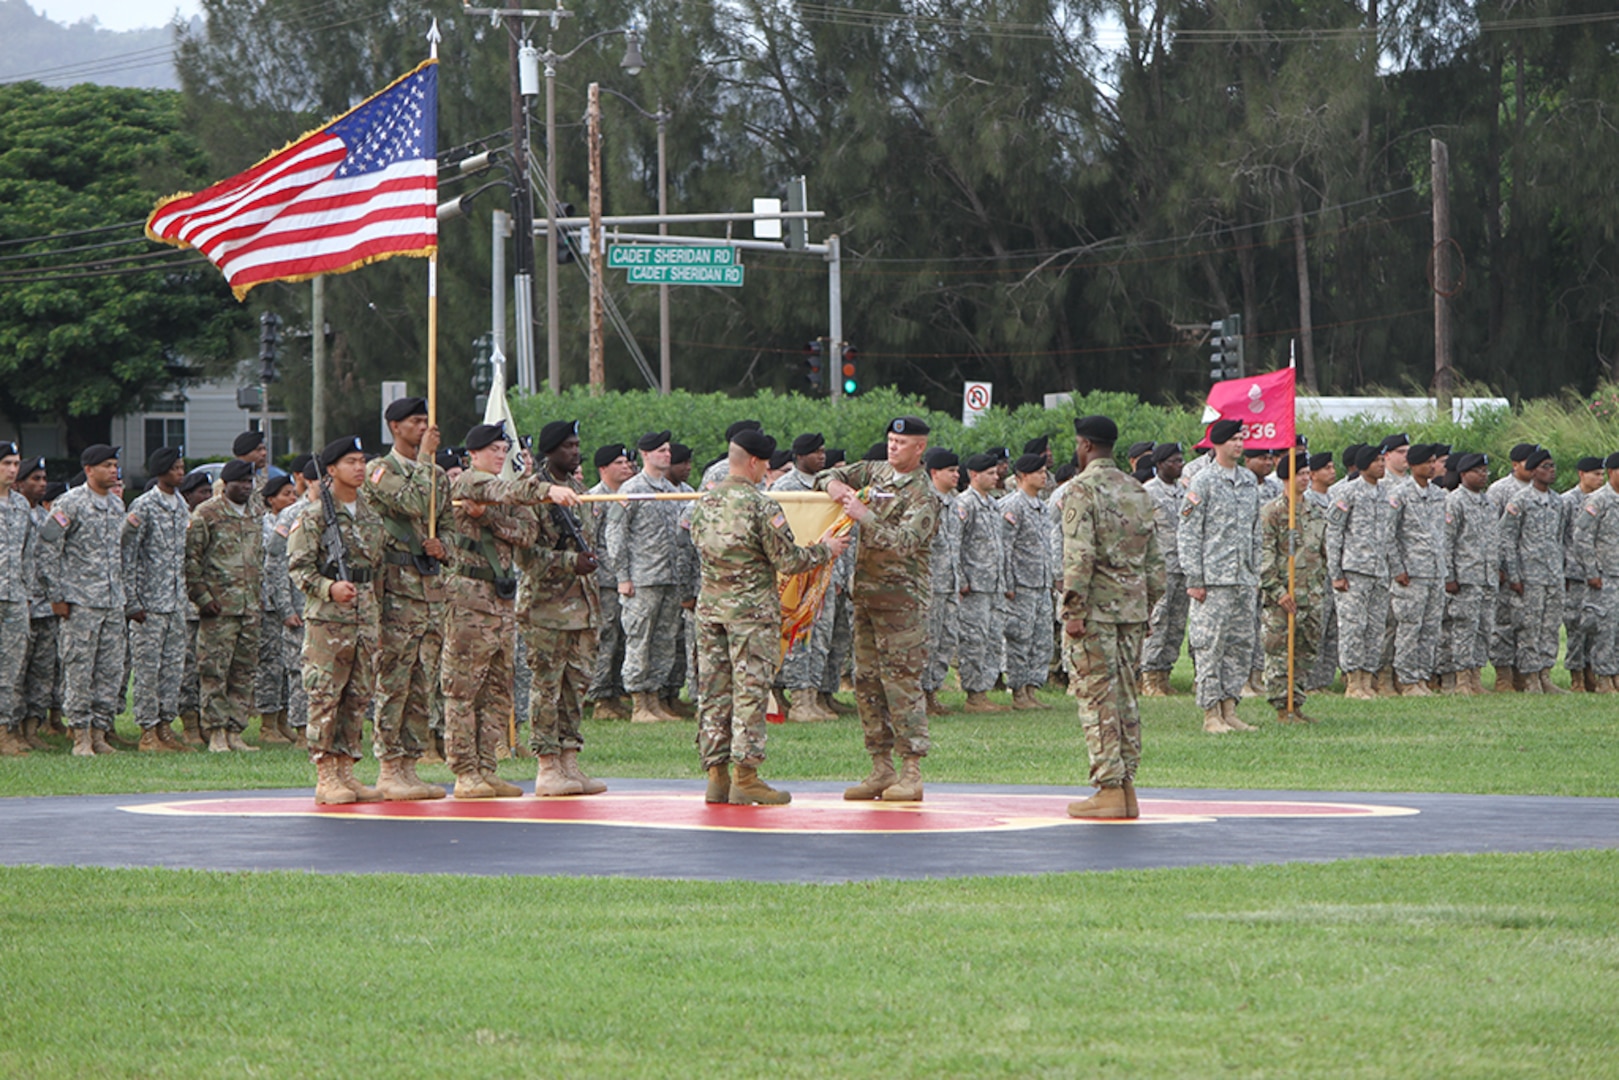 SCHOFIELD BARRACKS, Hawaii (Nov. 17, 2015) - Col. Gavin Lawrence, commander of the 25th Sustainment Brigade, Lt. Col. Donald Logsdon, commander of the 524th Combat Sustainment Support Battalion, and Maj. Matthew Day of the 524th CSSB prepare to case the unit colors during a casing ceremony at Watts Field.  The battalion will deploy to Kuwait in support of Operation Spartan Shield at the end of November. 